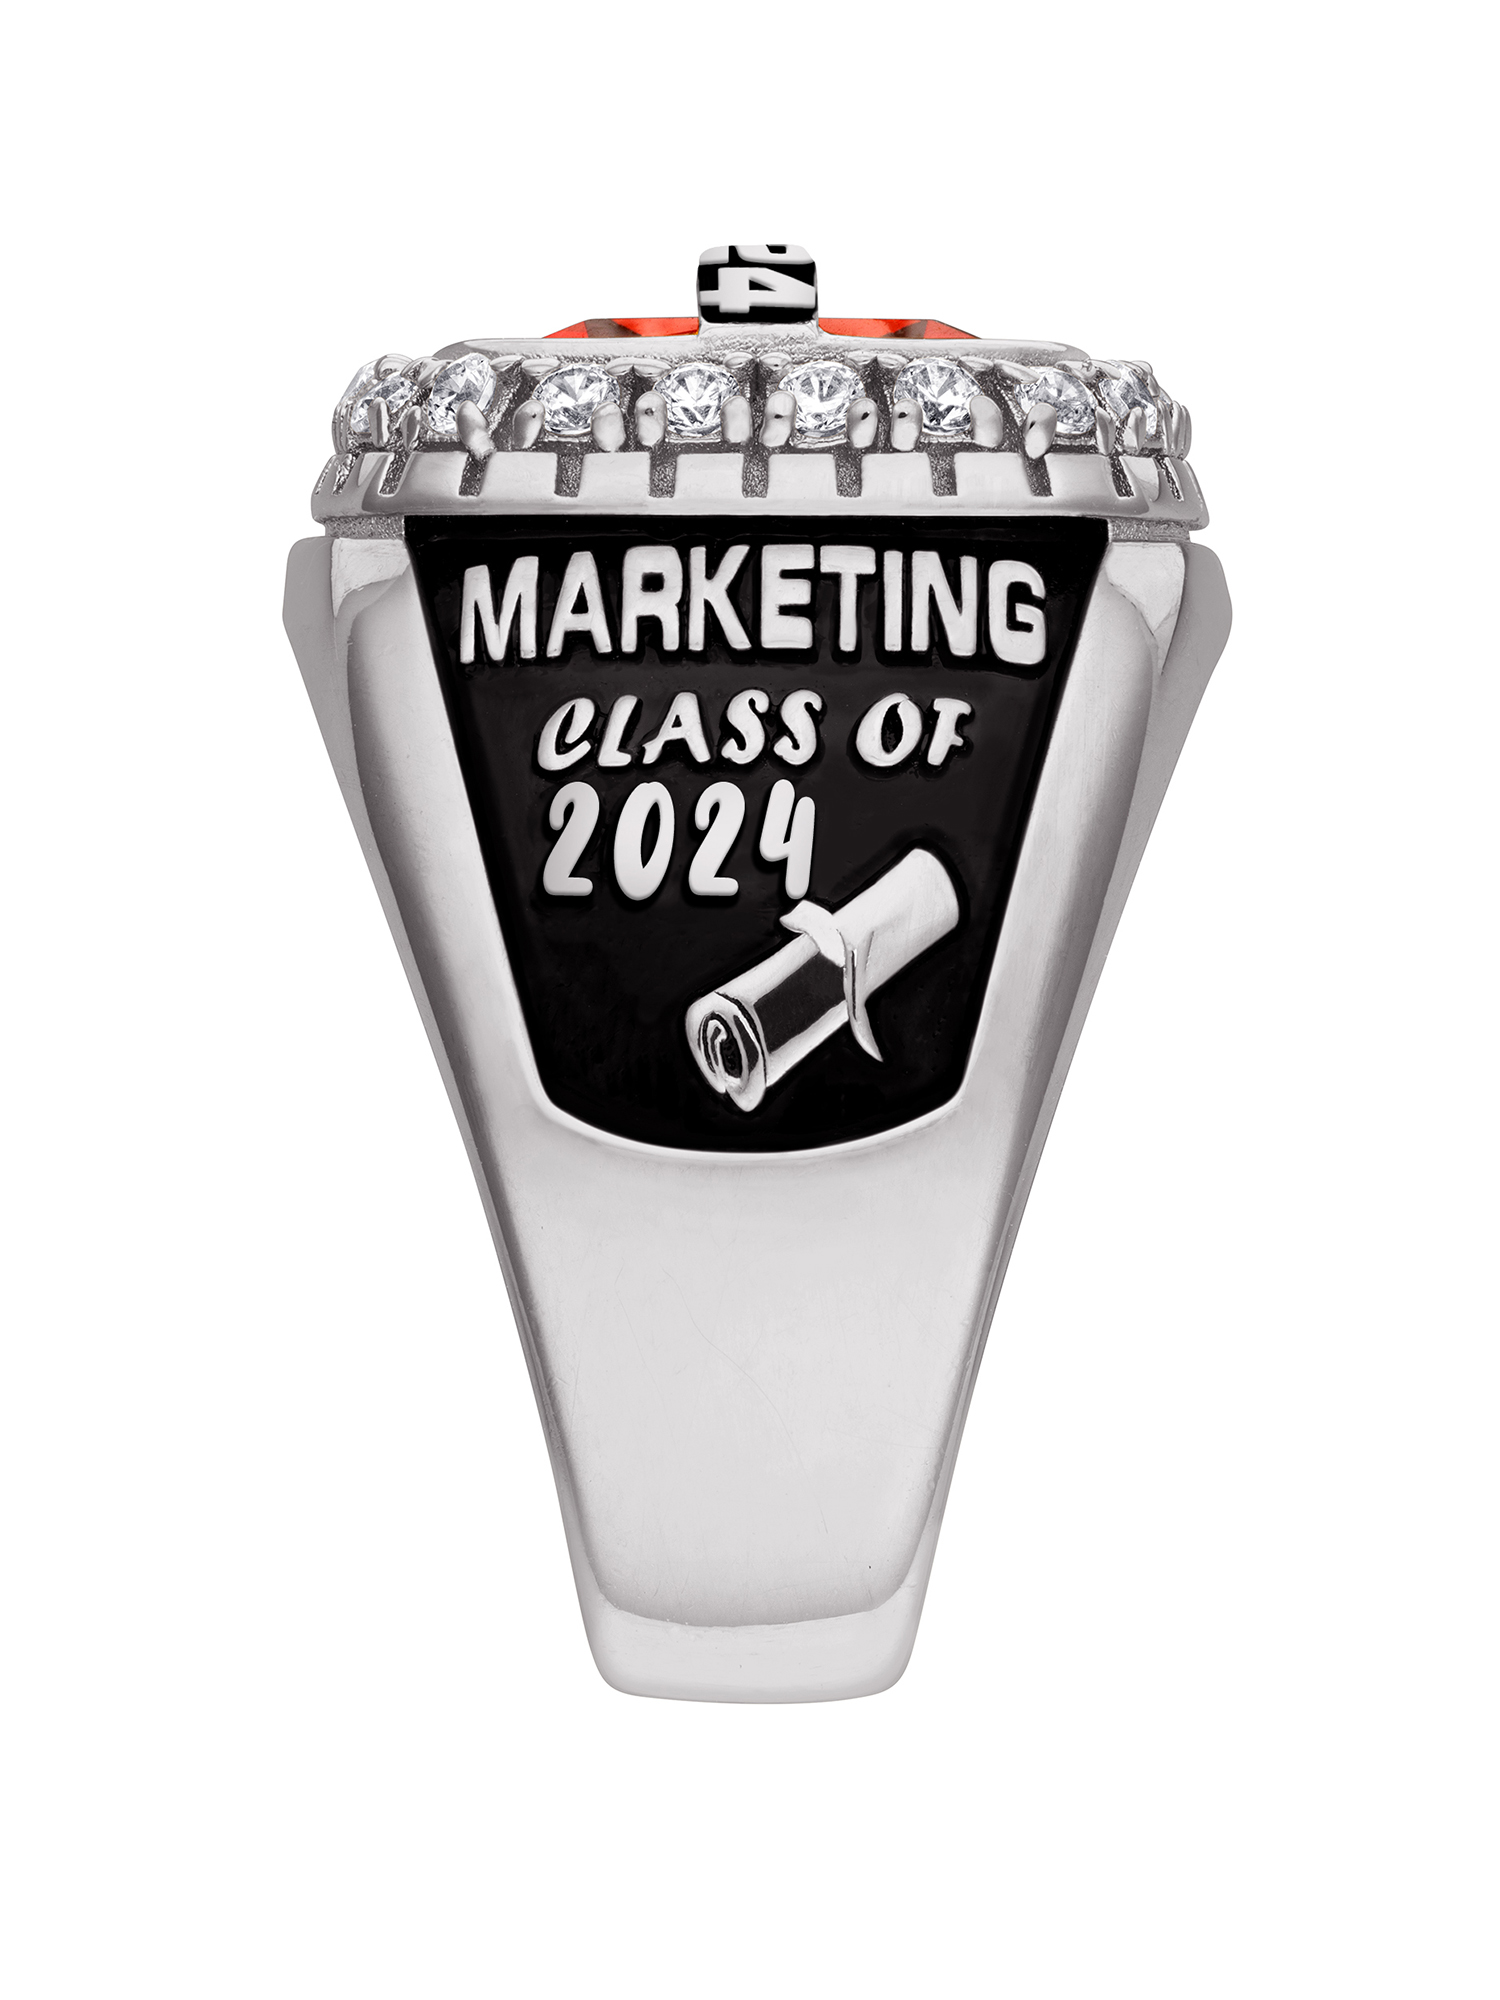 Order Now for Graduation, Freestyle Sterling Silver CZ Encrusted Top Class Ring, Personalized, High School or College - image 4 of 8